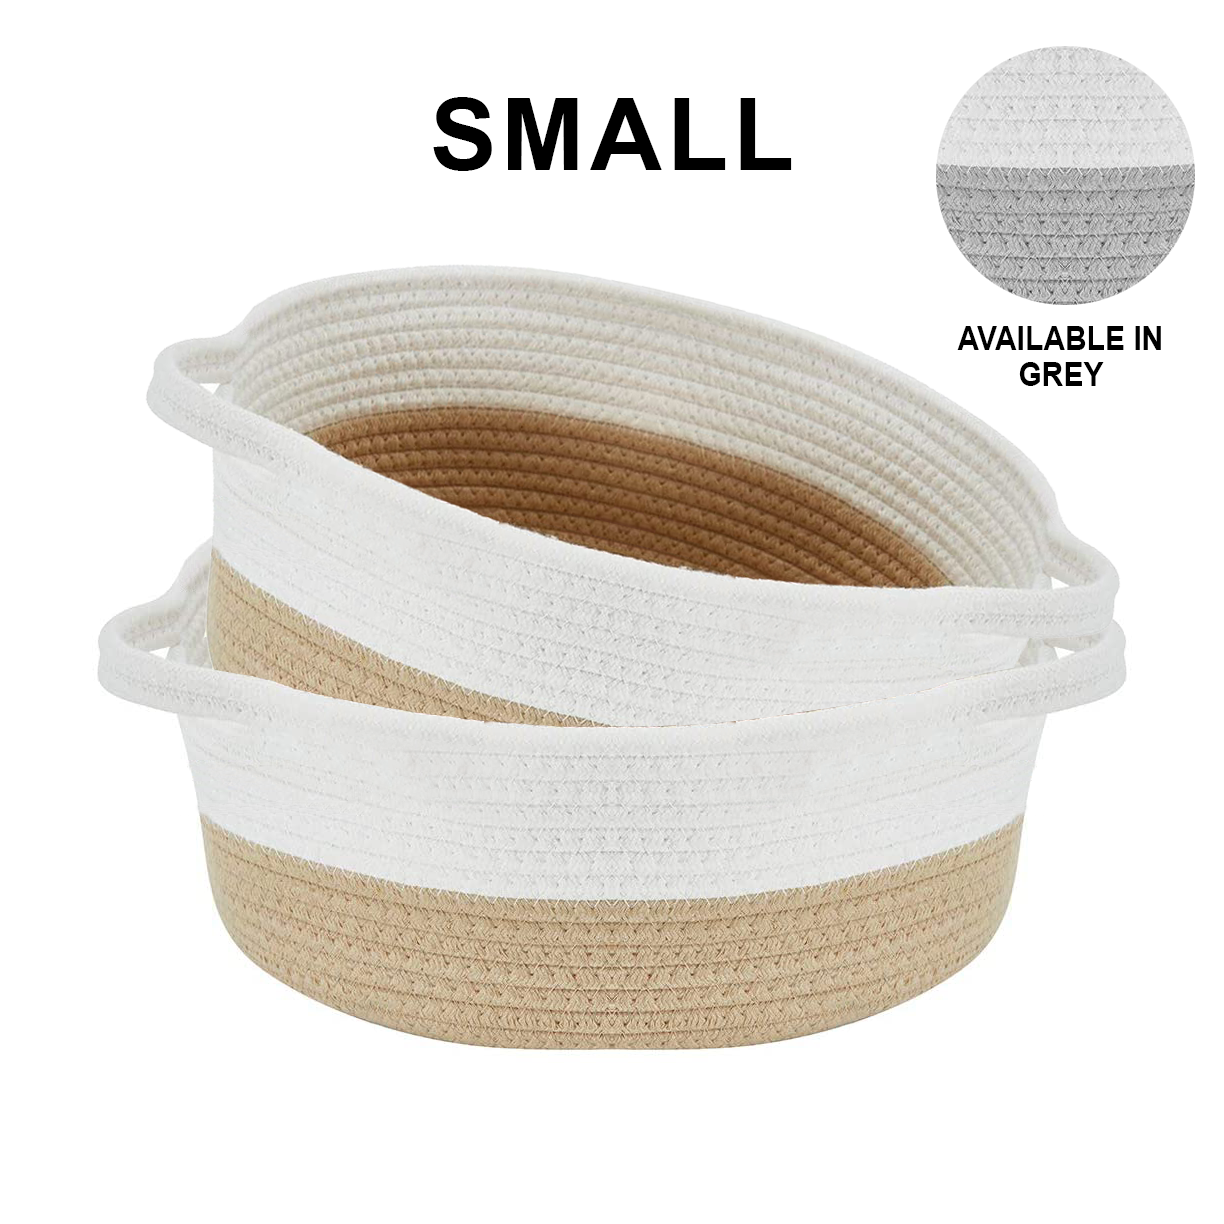 Decomomo Cotton Woven Rope Basket - Round Small (2 Pack)